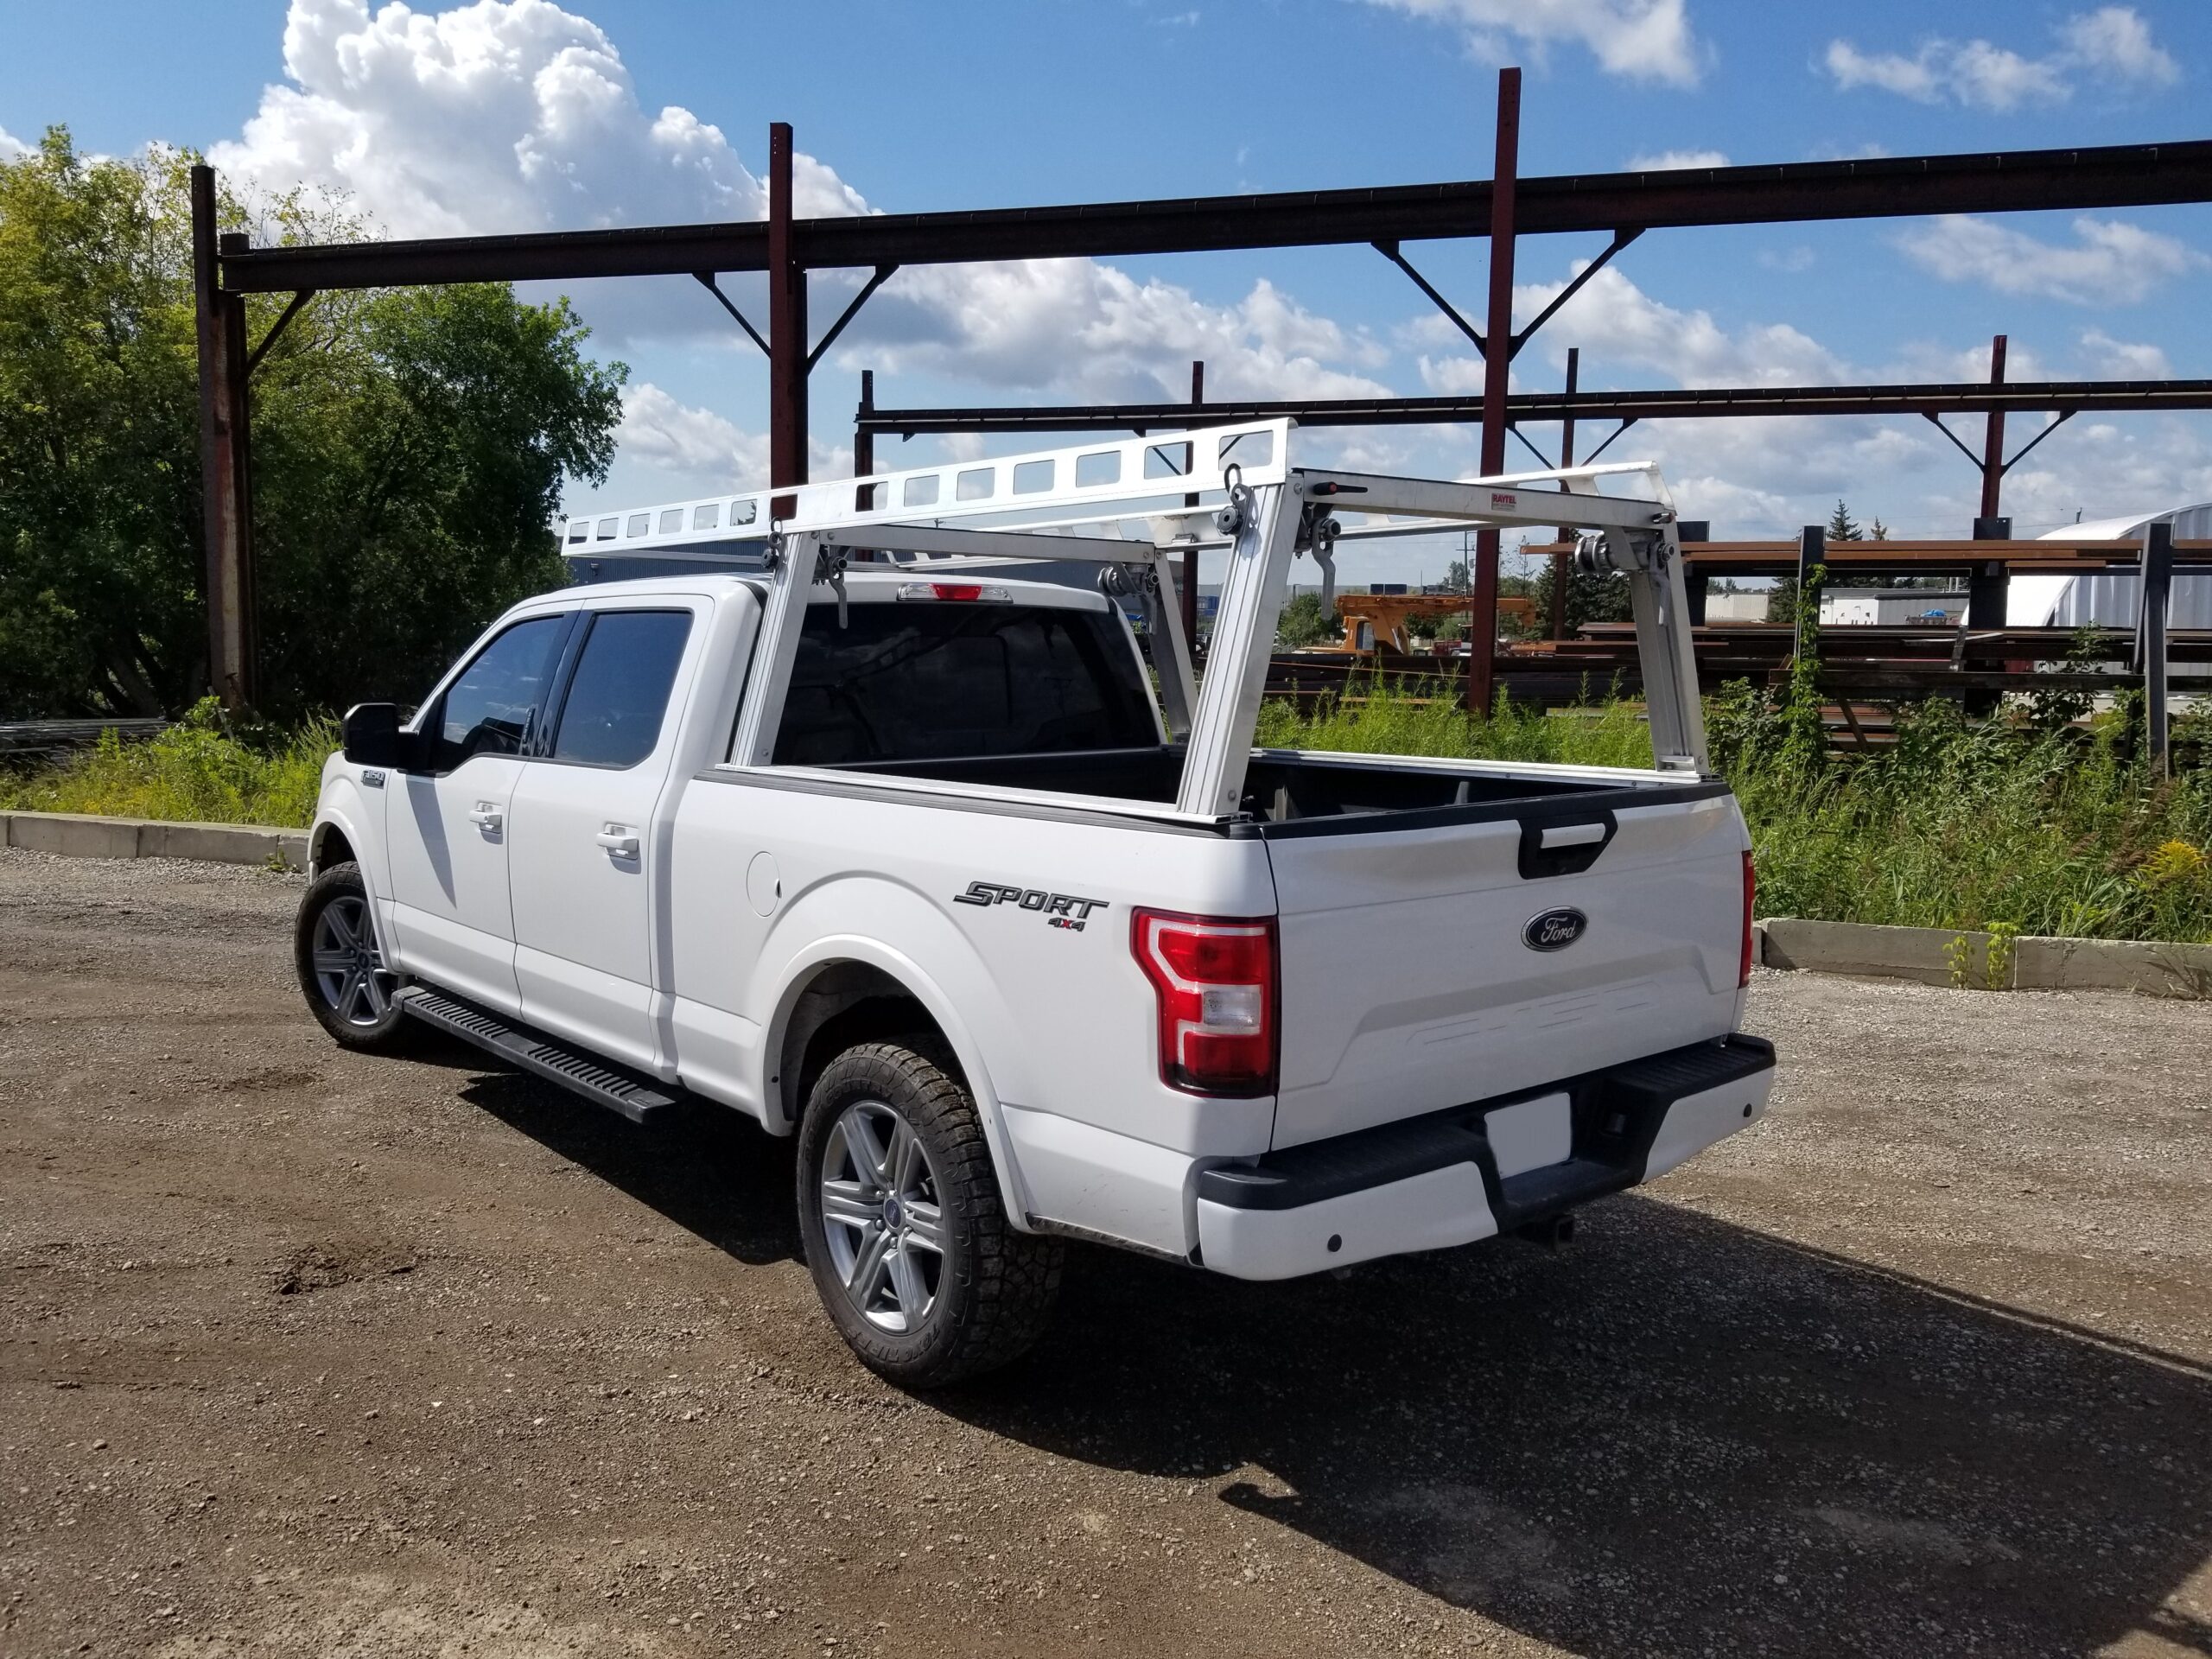 Ford F-150 Aluminum Contractor Rig with Work Winches